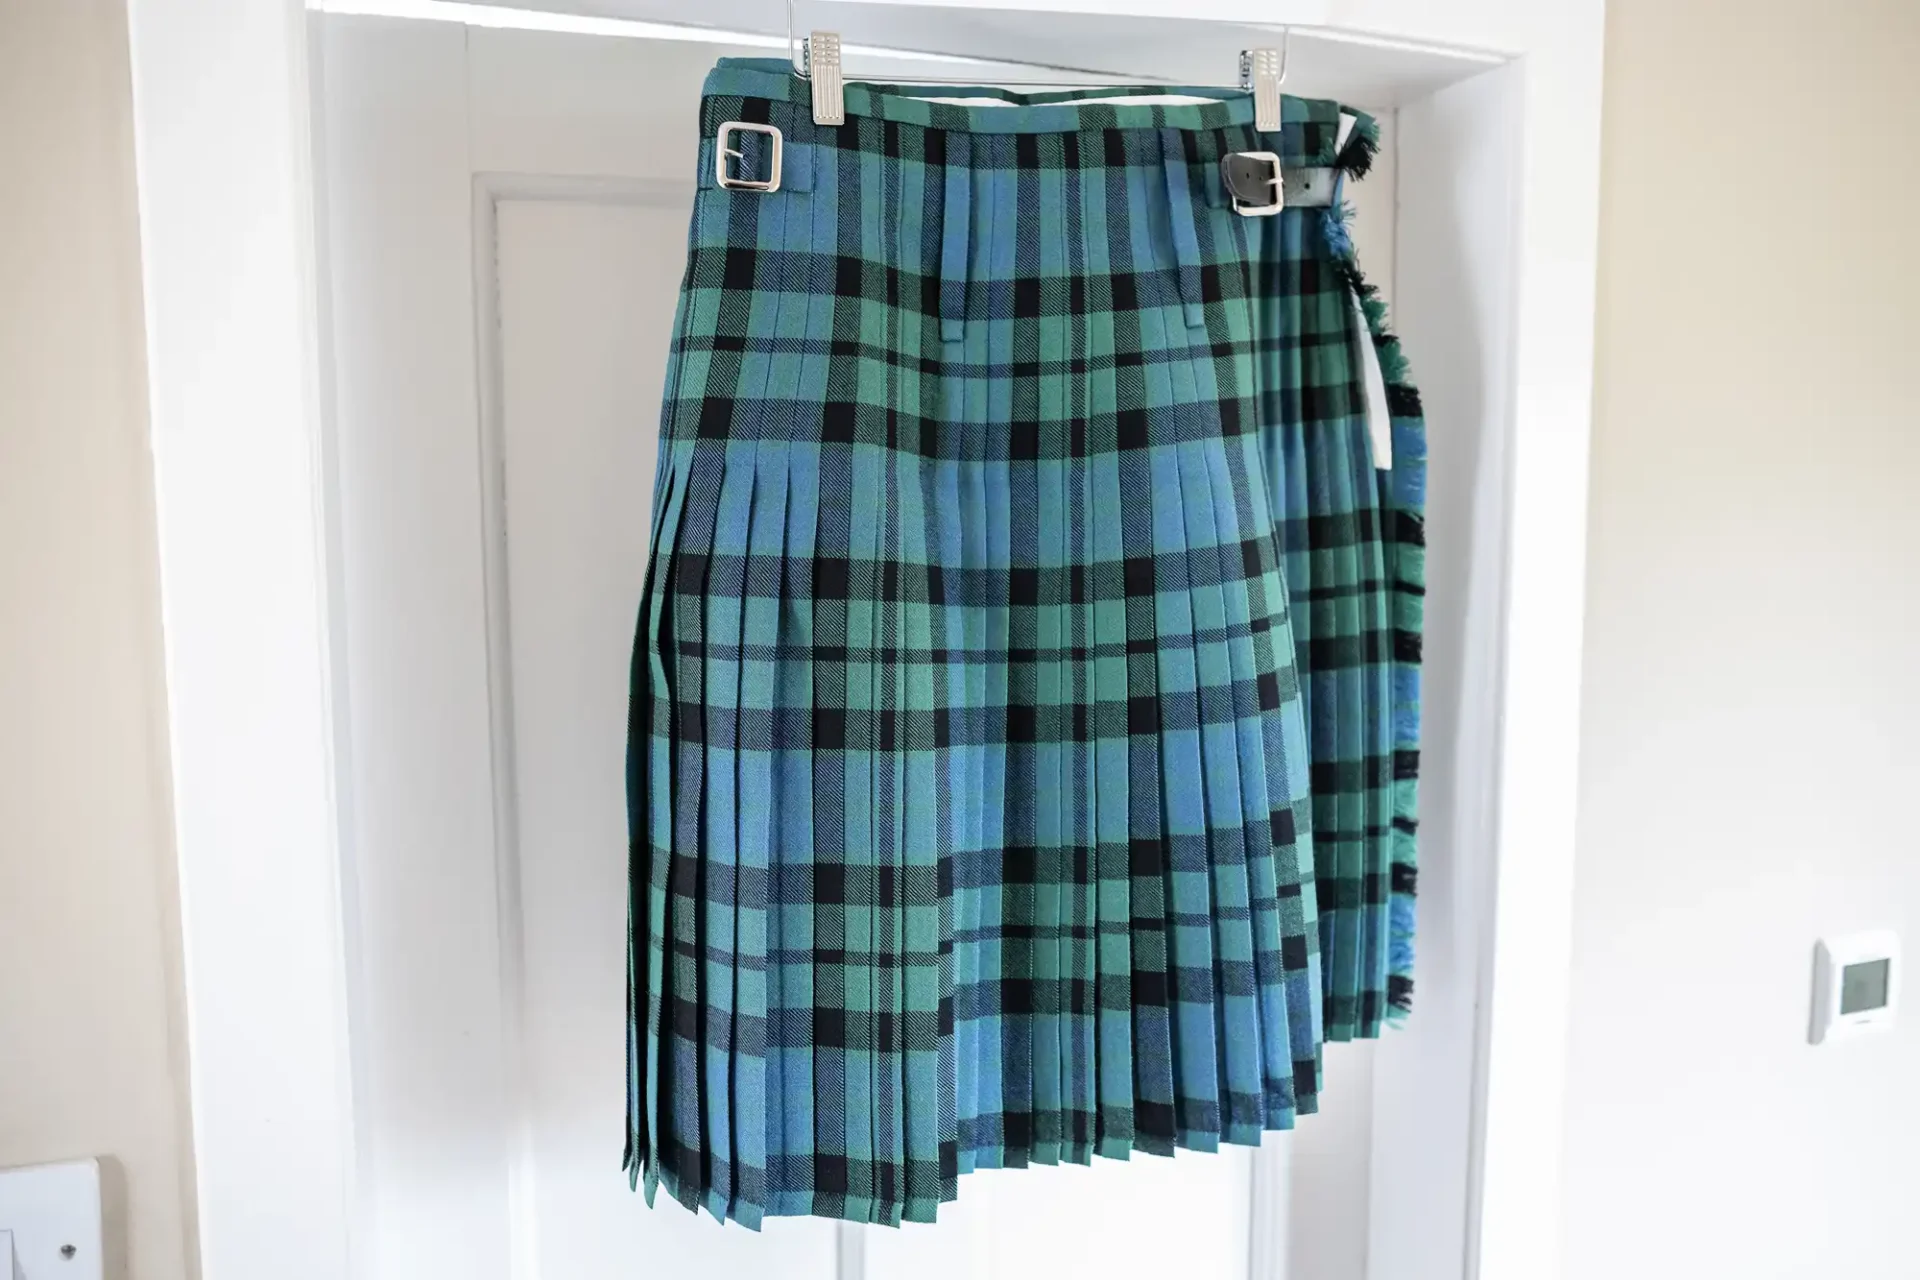 A blue and green tartan kilt with pleats and two silver buckles hangs on a white door.